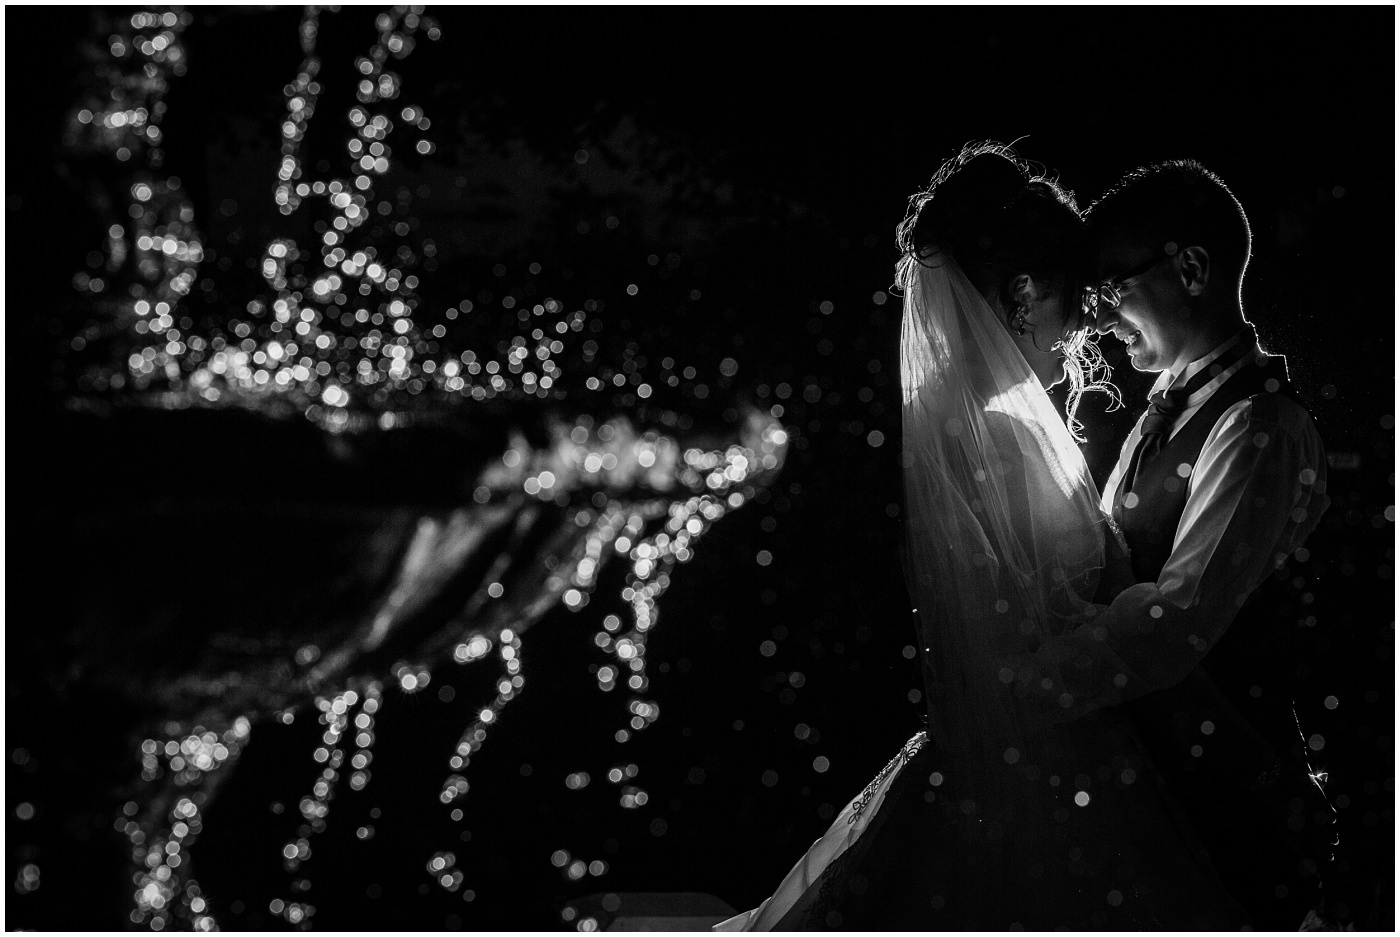 bride and groom in black and white share a moment by a fountain